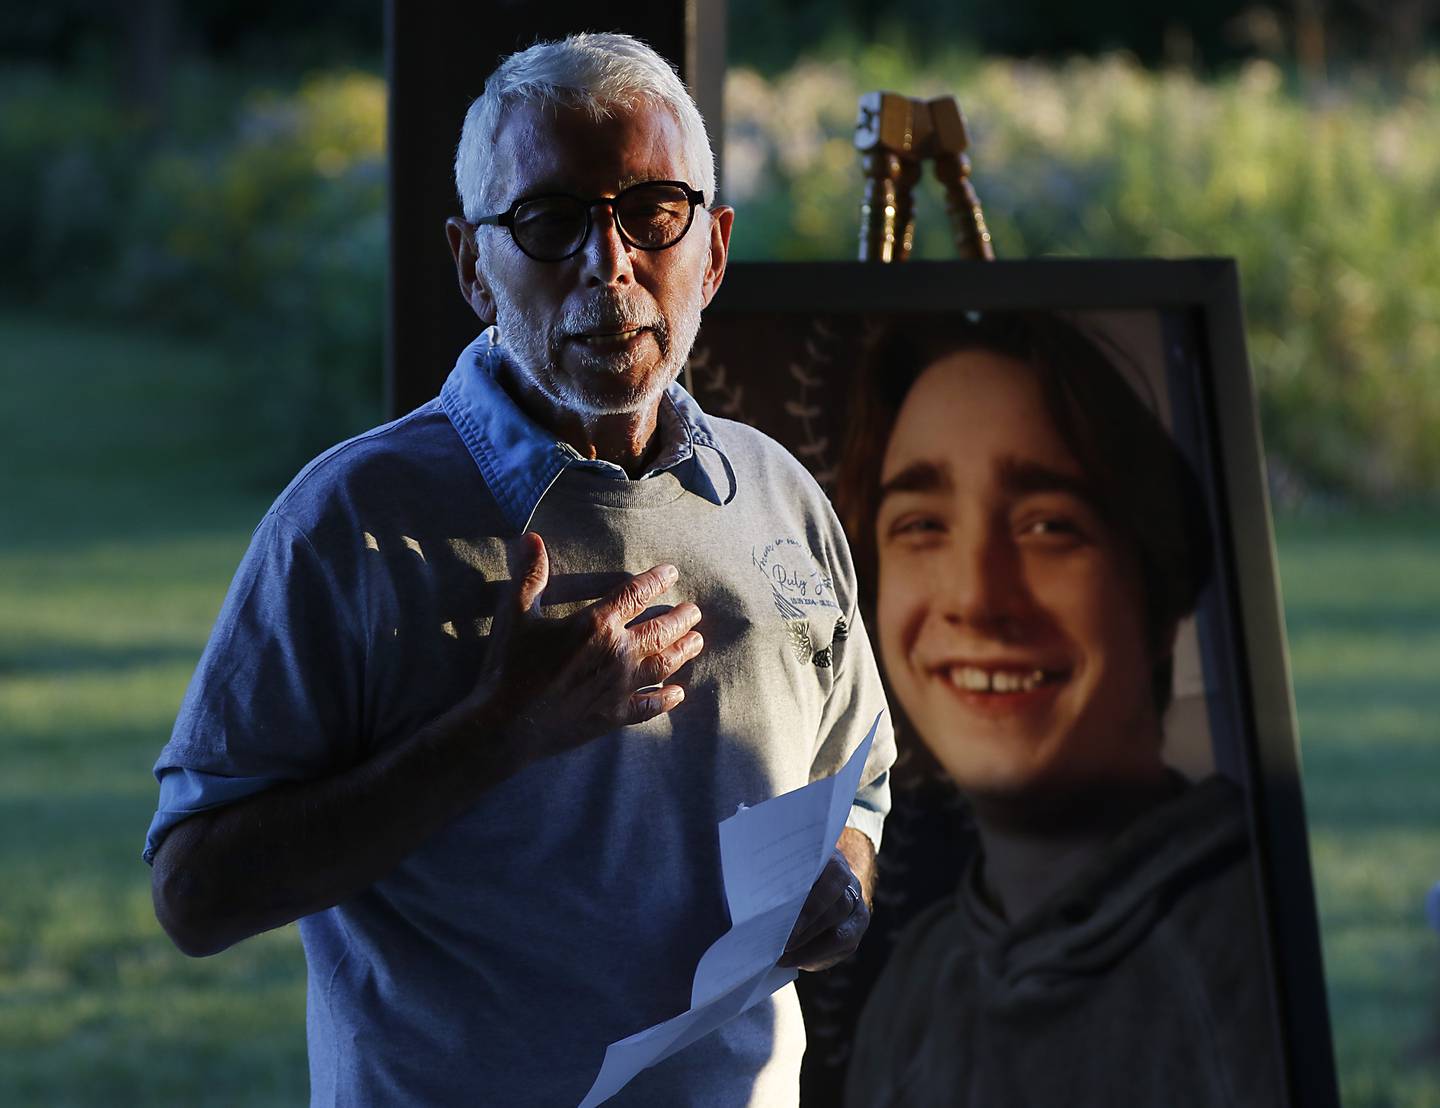 Peter Passuntino talks about his grandson, Riely Teuerle, pictured be hind him, during a candlelight celebration for Teuerle on Thursday, August 11, 2022, at Towne Park, 100 Jefferson Street in Algonquin. Teuerle was killed in a car crash in Lake in the Hills on Tuesday. Over 100 family members and friends gathered at the park to remember and celebrate Teuerle’s life.